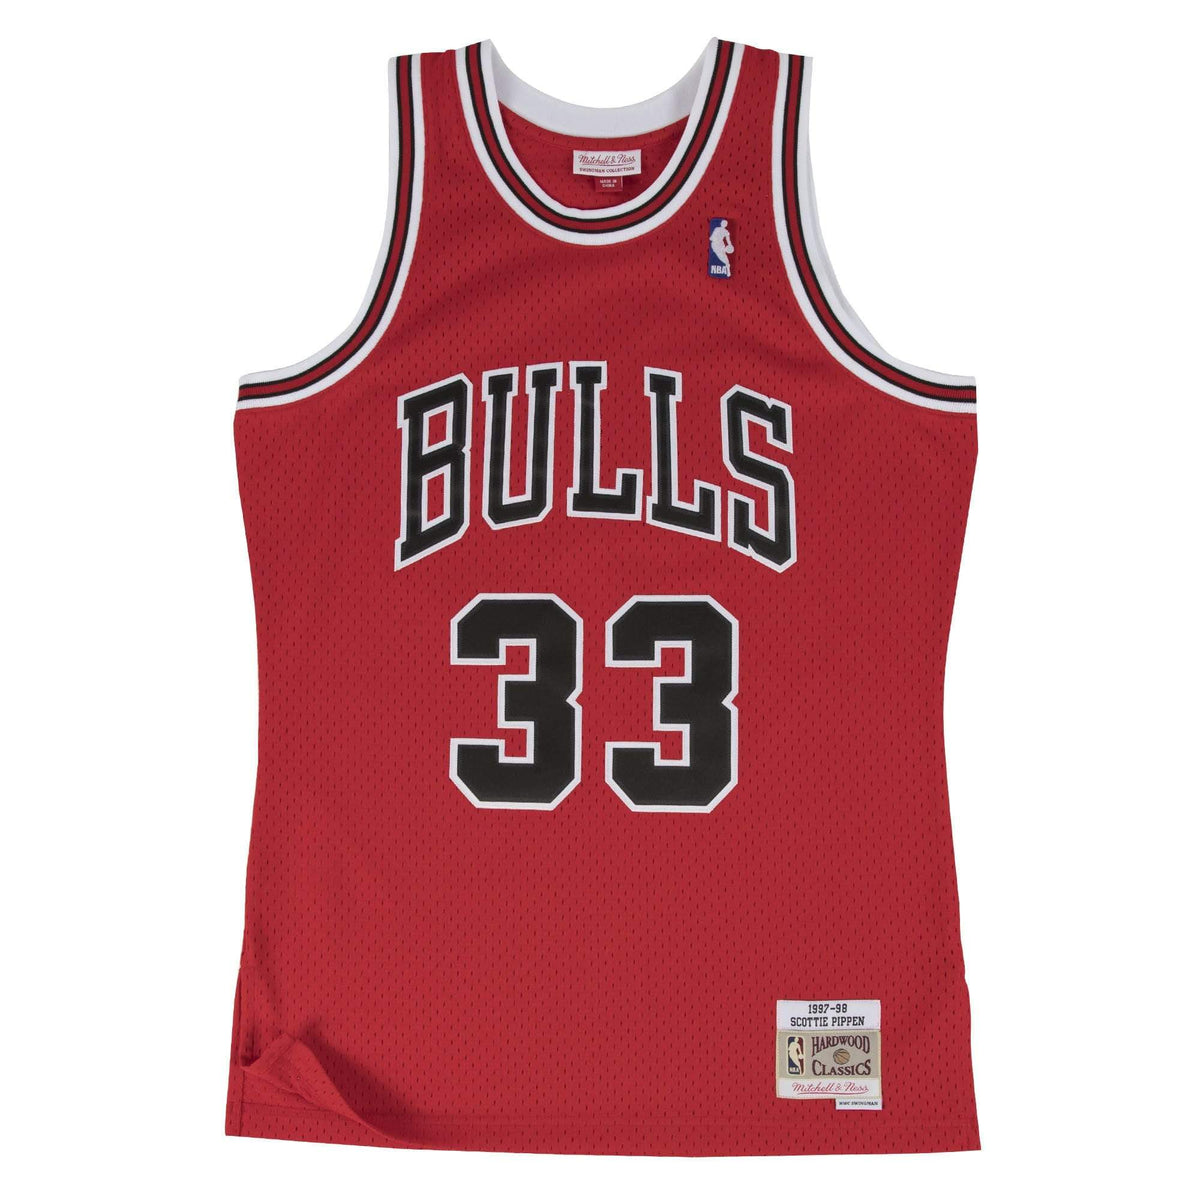 If the Bulls had a classic jersey next season, which one should it